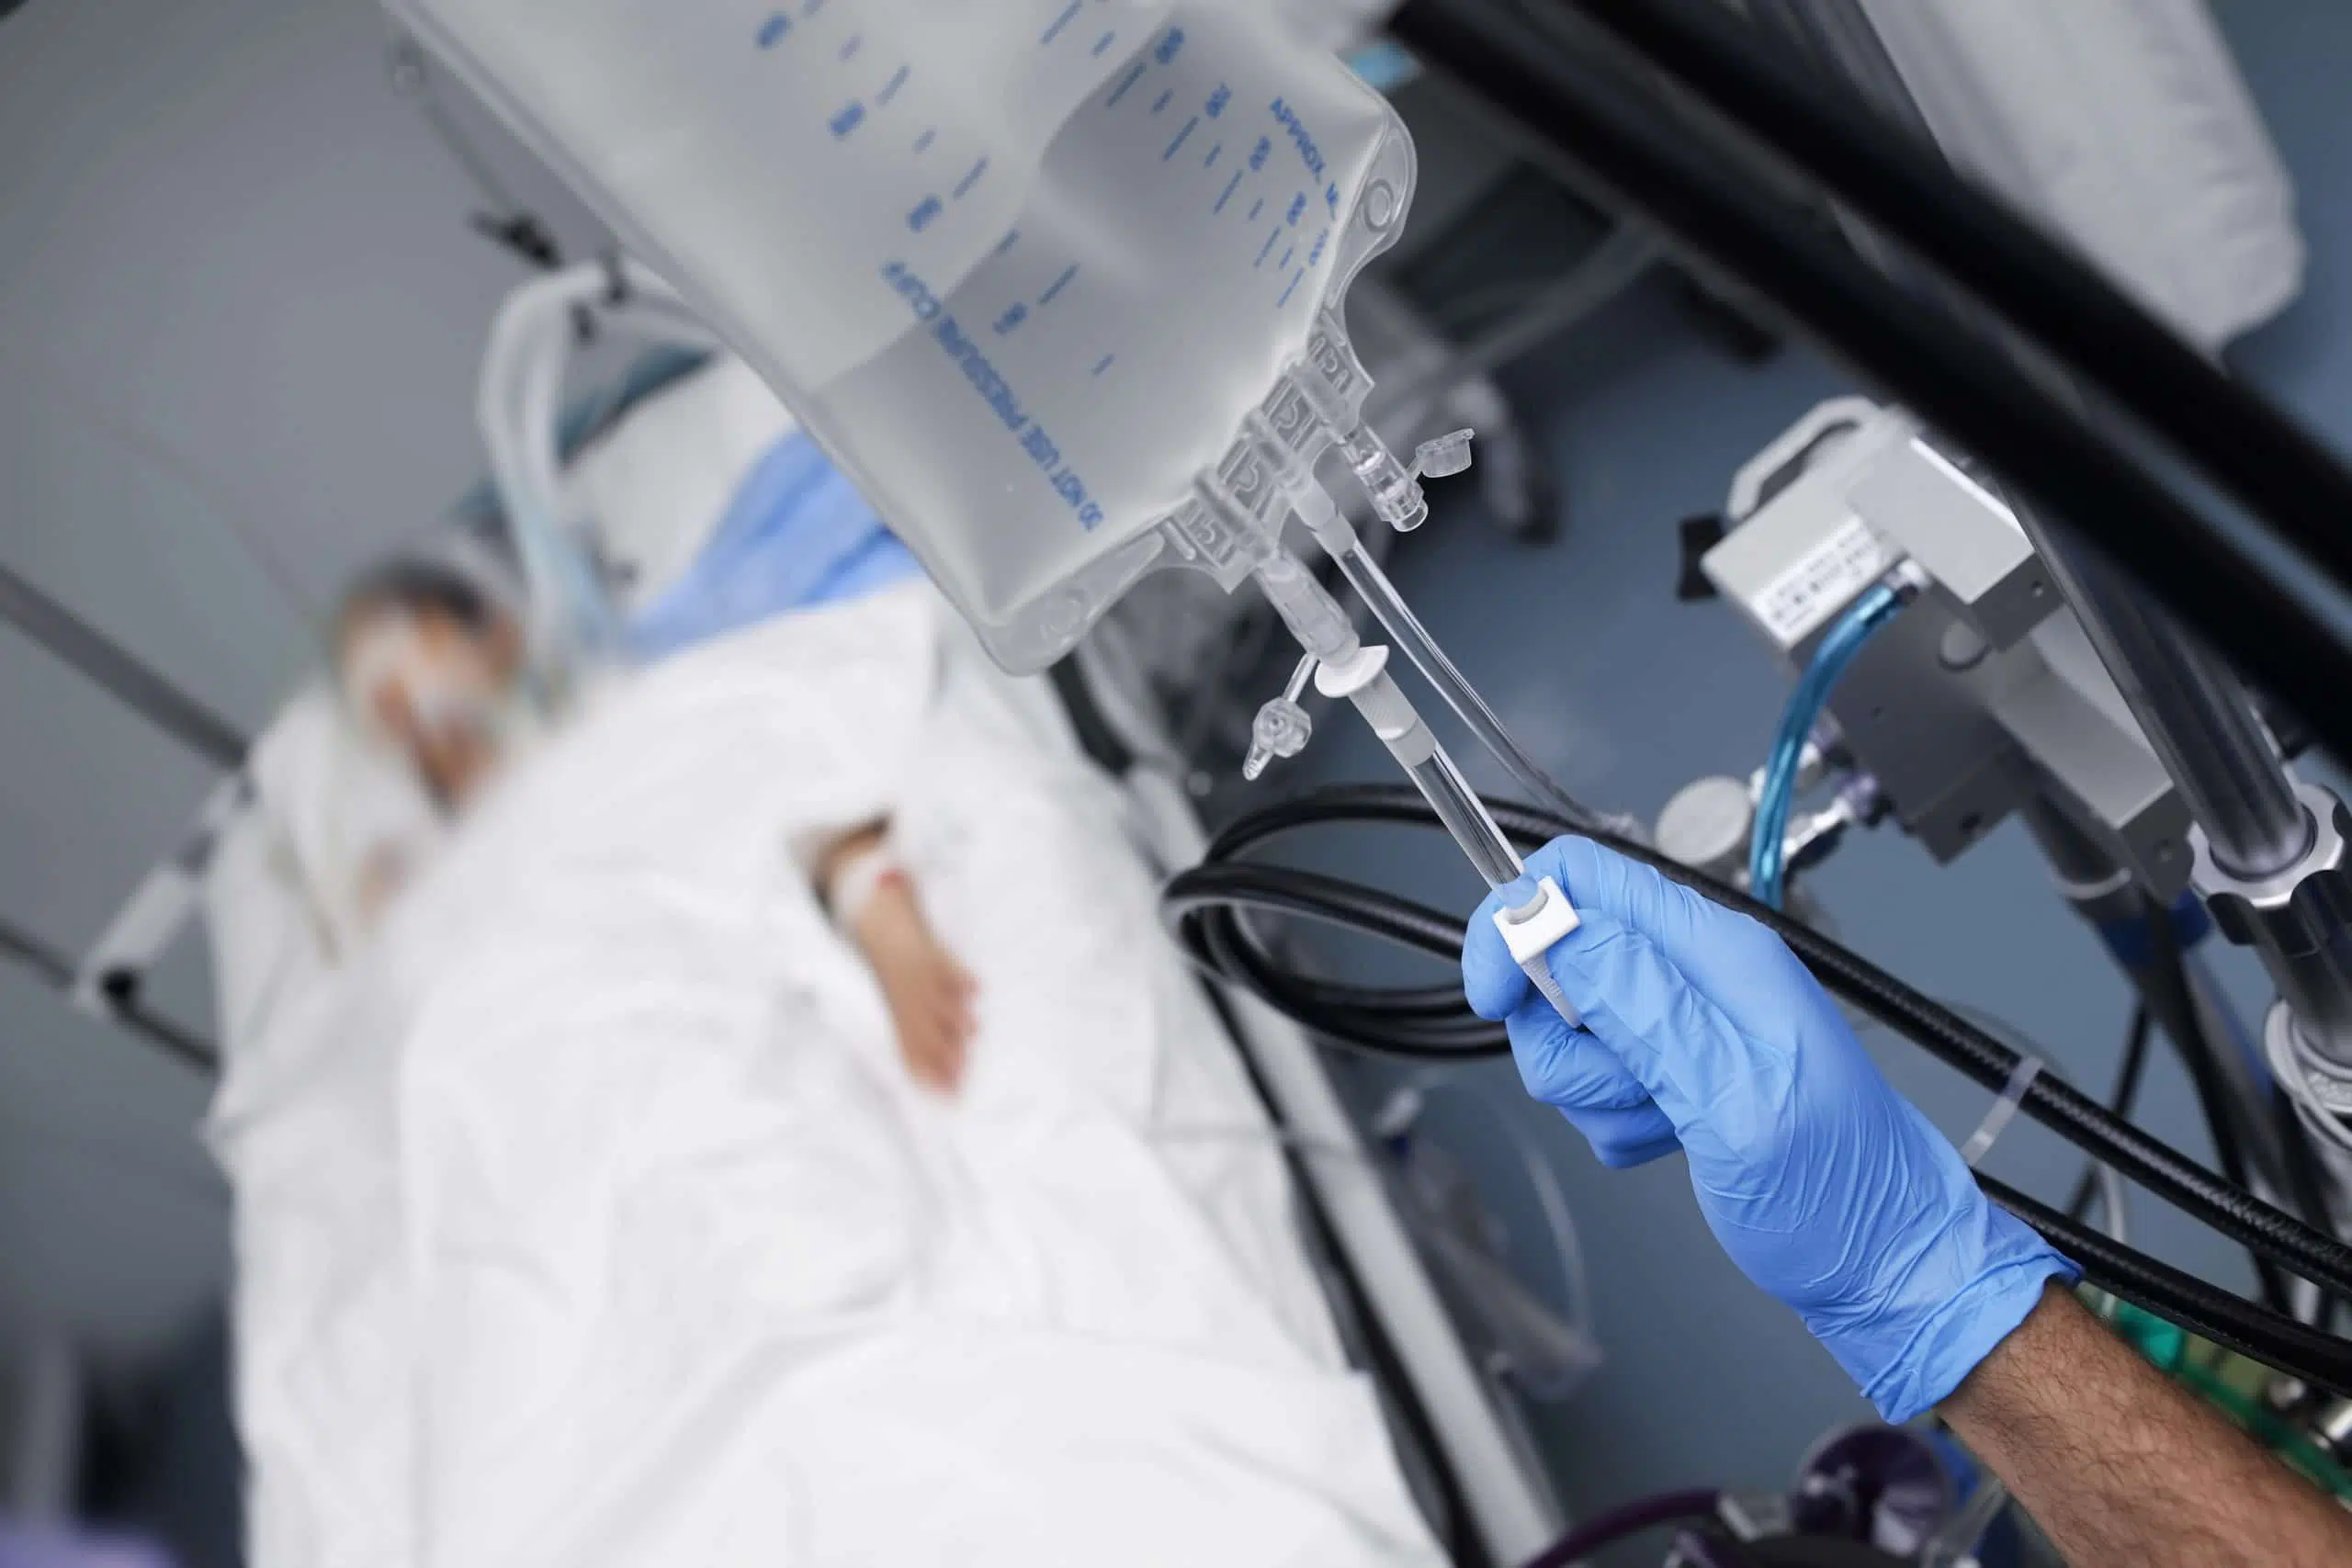 unplugging IV from unconscious patient, euthanasia